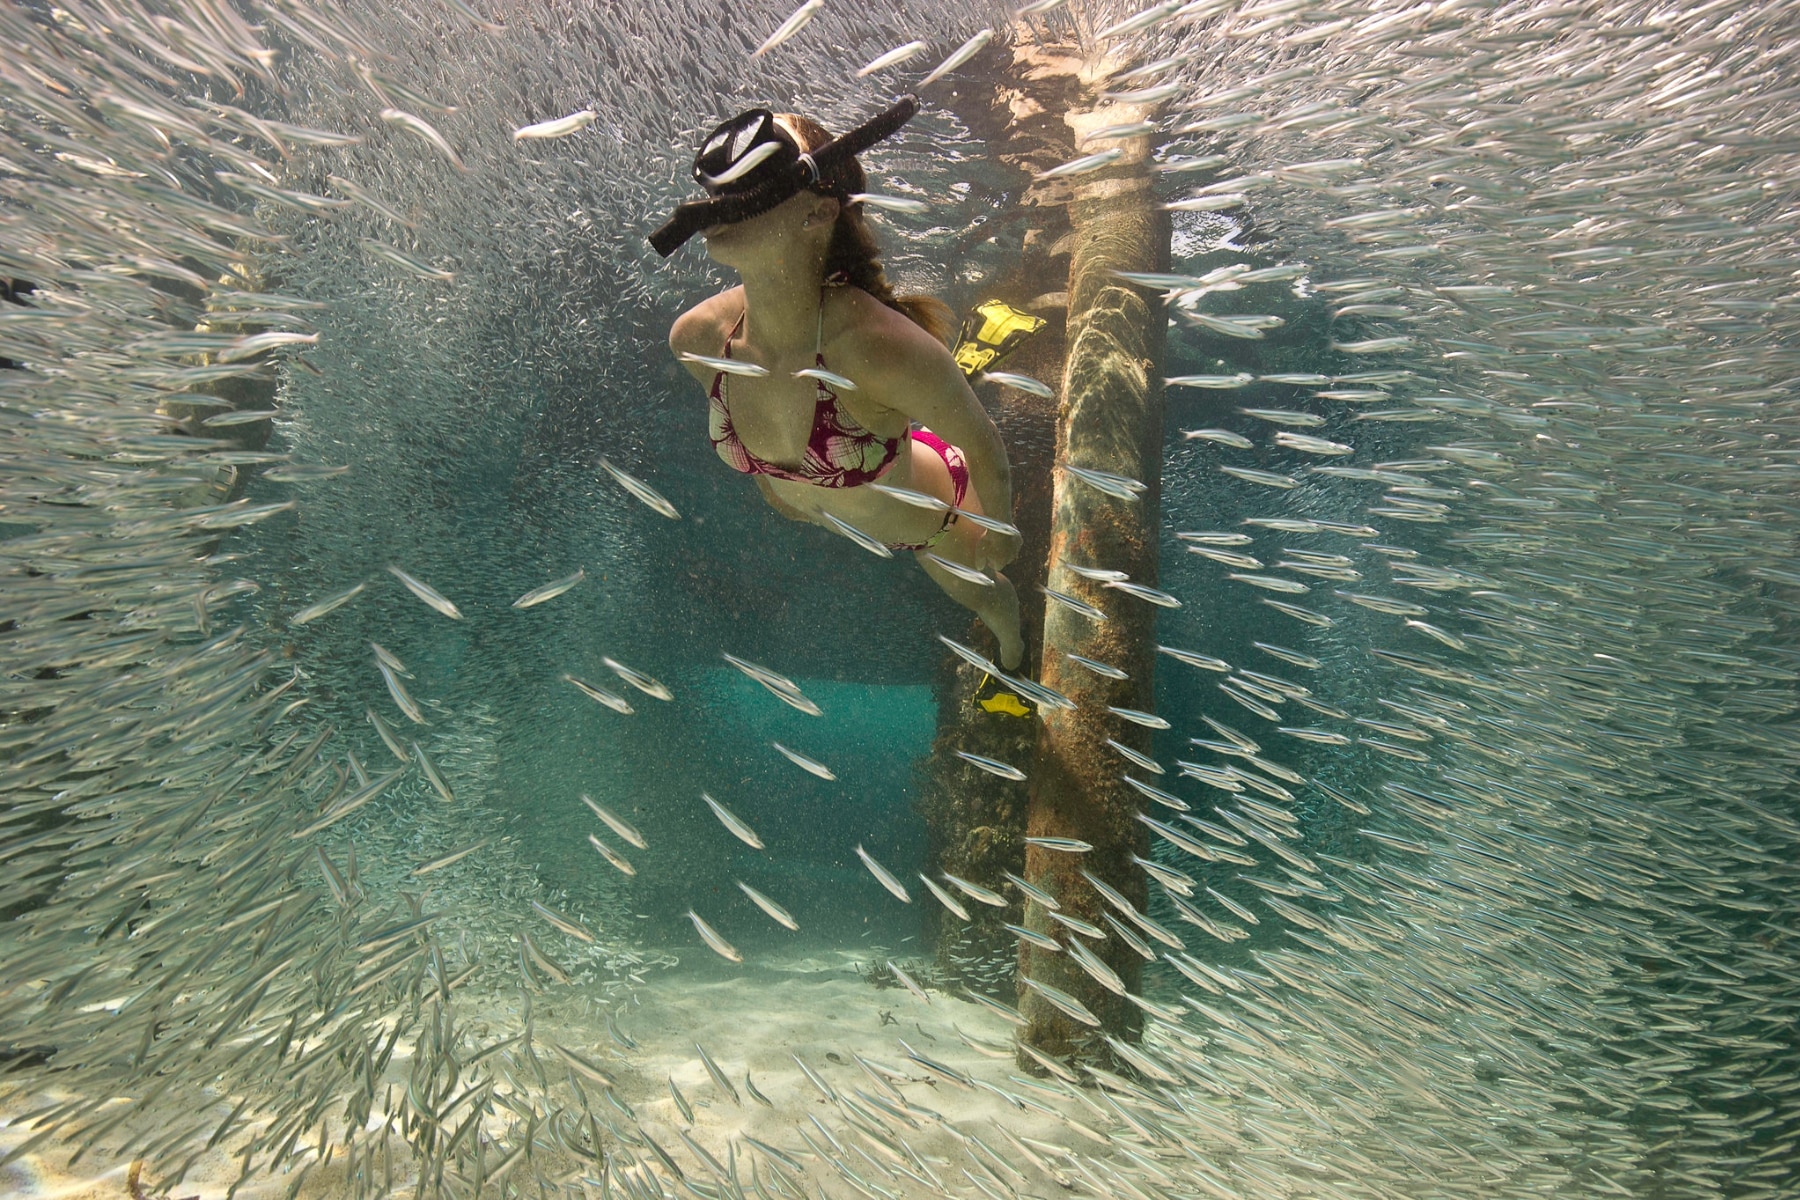 Schools of fish surround a snorkeler in Florida's Coral Reef.